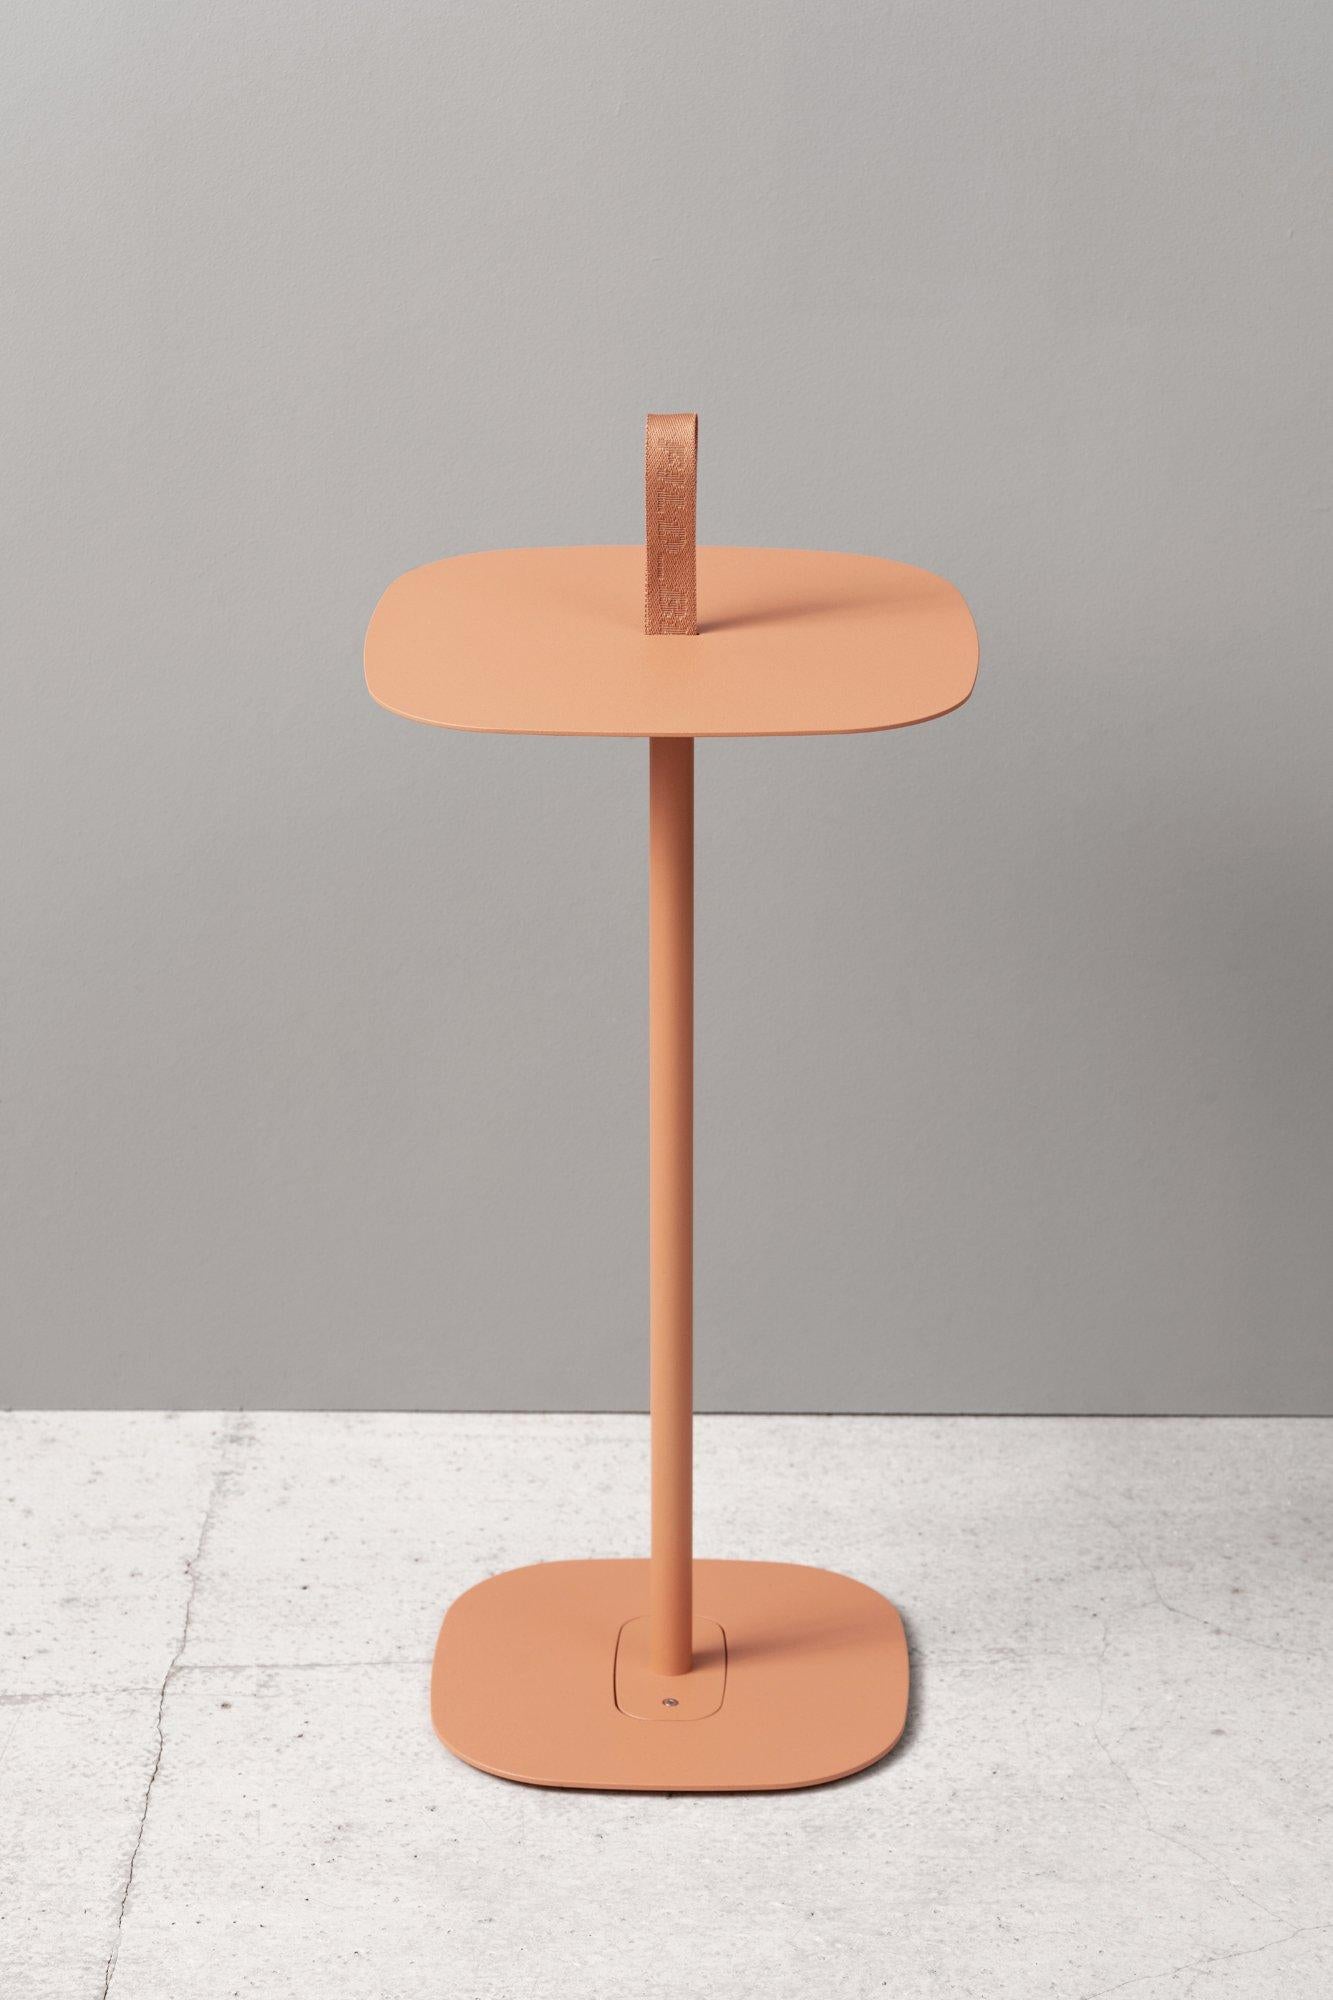 BLT Table Coral Small Side Table by +kouple
Dimensions: D 32 x W 32 x H 60 cm. 
Materials: Powder-coated steel and textile.

Available in different color options. Available in two different sizes. Please contact us.

+kouple – one of the leading